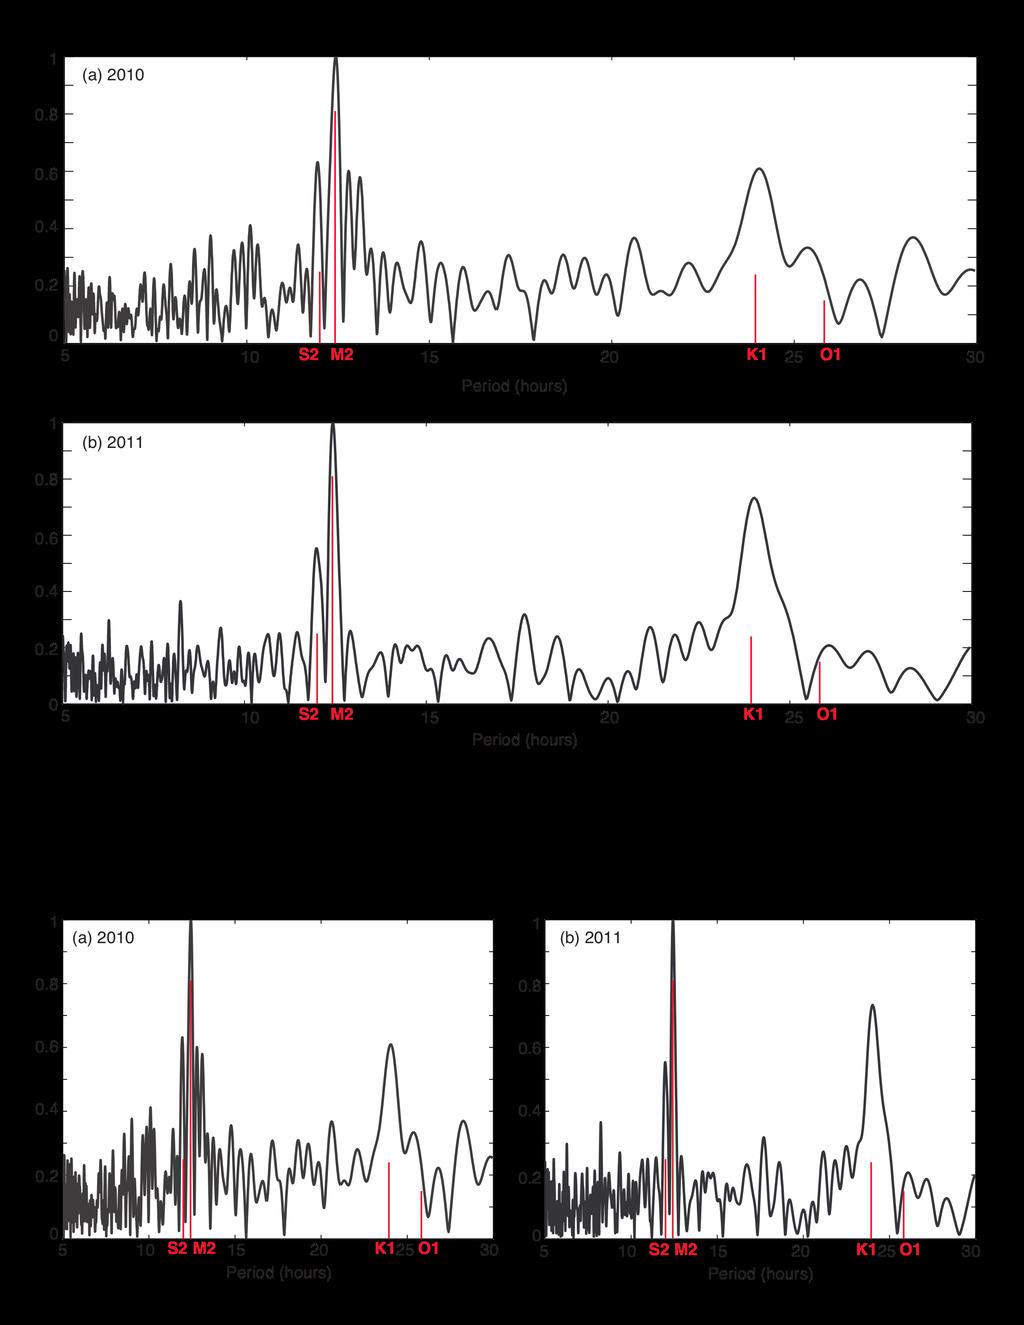 Figure 2. Amplitude spectra for two ETS events: (a) August 8 through September 8, 2010, and (b) August 1 through September 4, 2011.